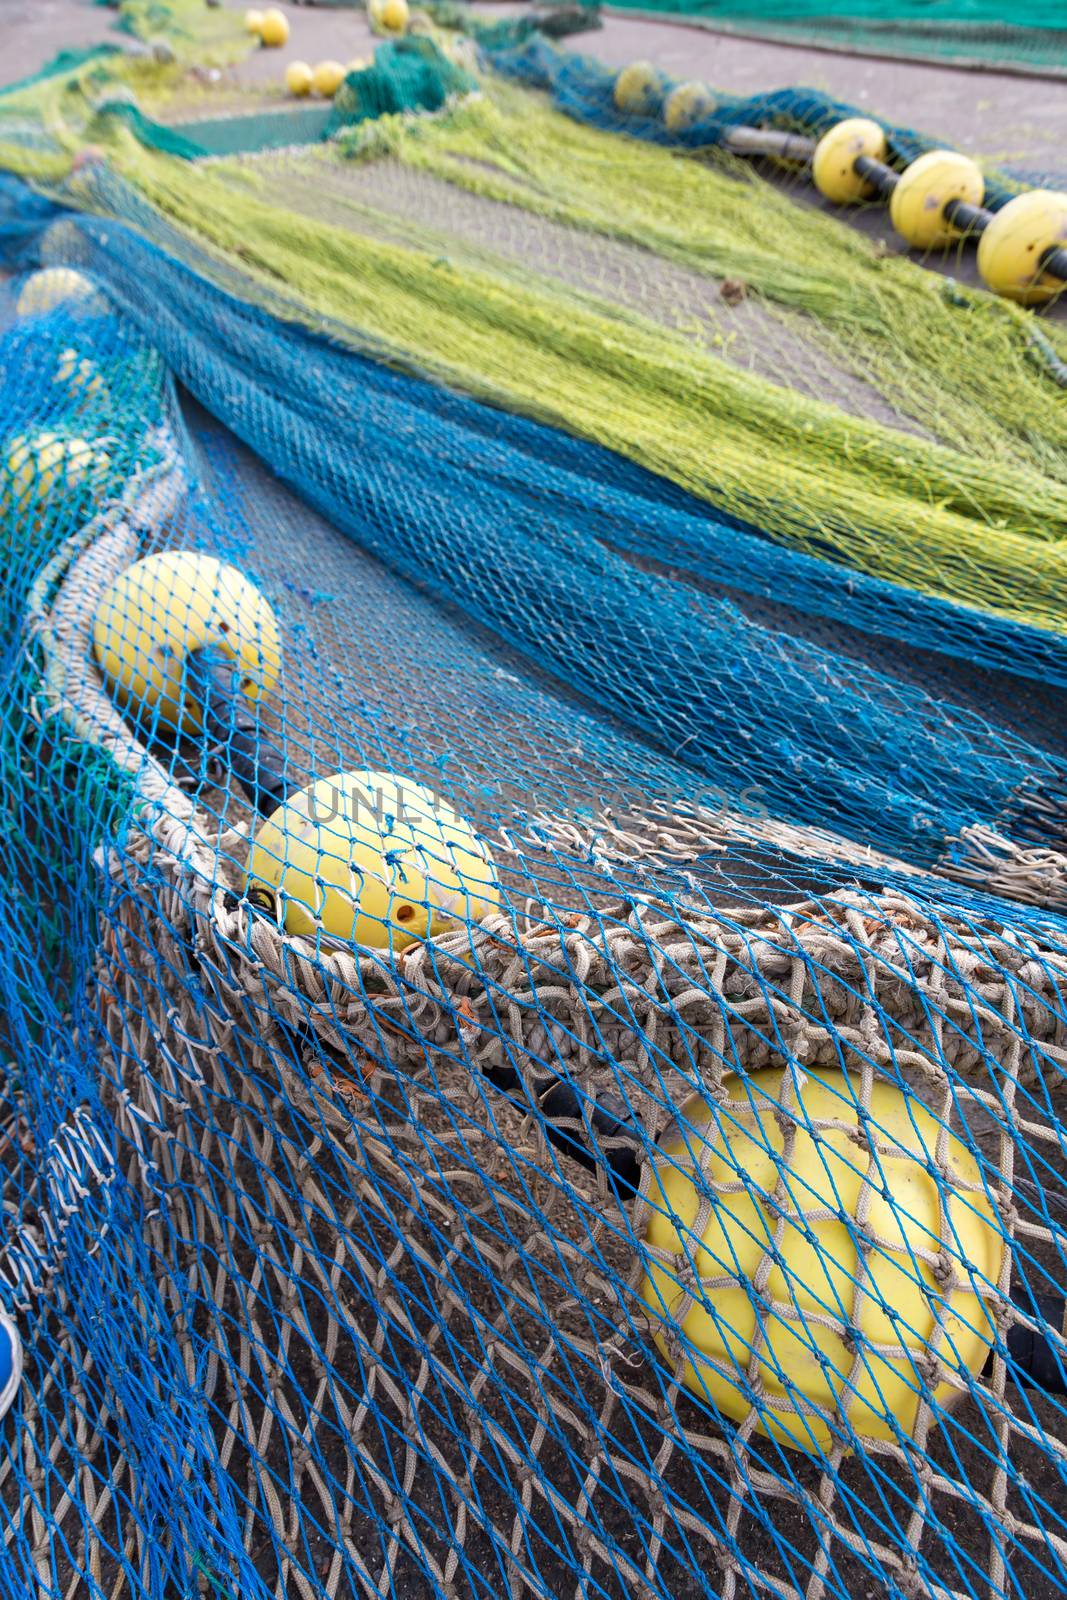 Fishing nets drying after the fishing
